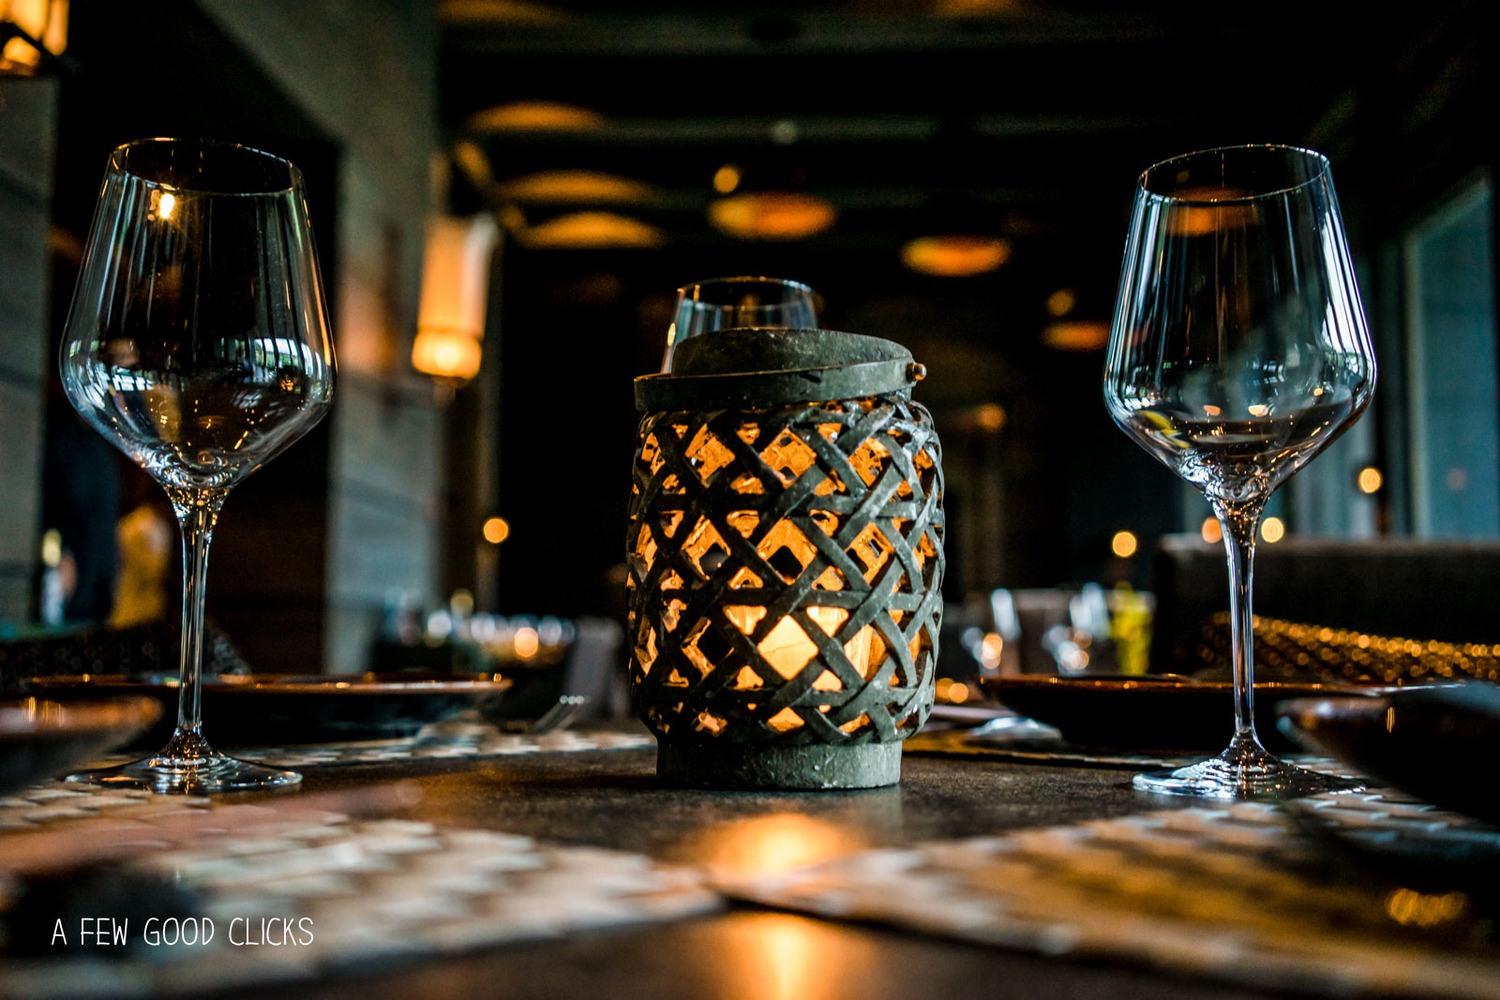 dining-table-setup-indochine-restaurant-picture-afewgoodclicks-net